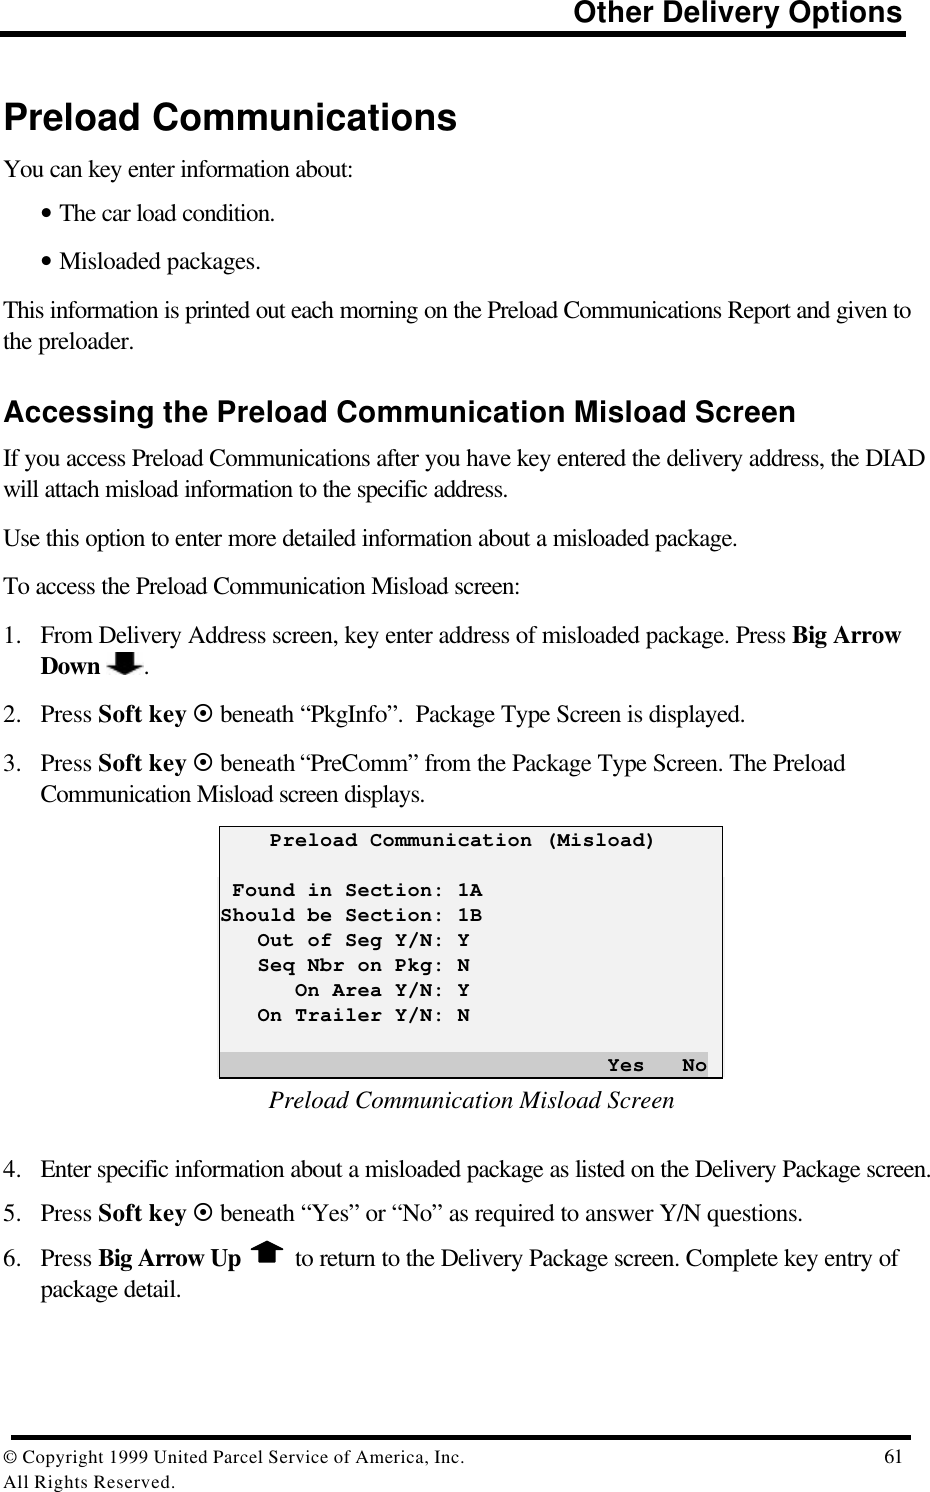                                                                          Other Delivery Options© Copyright 1999 United Parcel Service of America, Inc.  61All Rights Reserved.Preload CommunicationsYou can key enter information about:• The car load condition.• Misloaded packages.This information is printed out each morning on the Preload Communications Report and given tothe preloader.Accessing the Preload Communication Misload ScreenIf you access Preload Communications after you have key entered the delivery address, the DIADwill attach misload information to the specific address.Use this option to enter more detailed information about a misloaded package.To access the Preload Communication Misload screen:1. From Delivery Address screen, key enter address of misloaded package. Press Big ArrowDown  .2. Press Soft key ¤ beneath “PkgInfo”.  Package Type Screen is displayed.3. Press Soft key ¤ beneath “PreComm” from the Package Type Screen. The PreloadCommunication Misload screen displays.    Preload Communication (Misload) Found in Section: 1AShould be Section: 1B   Out of Seg Y/N: Y   Seq Nbr on Pkg: N      On Area Y/N: Y   On Trailer Y/N: N                               Yes   NoPreload Communication Misload Screen4. Enter specific information about a misloaded package as listed on the Delivery Package screen.5. Press Soft key ¤ beneath “Yes” or “No” as required to answer Y/N questions.6. Press Big Arrow Up   to return to the Delivery Package screen. Complete key entry ofpackage detail.